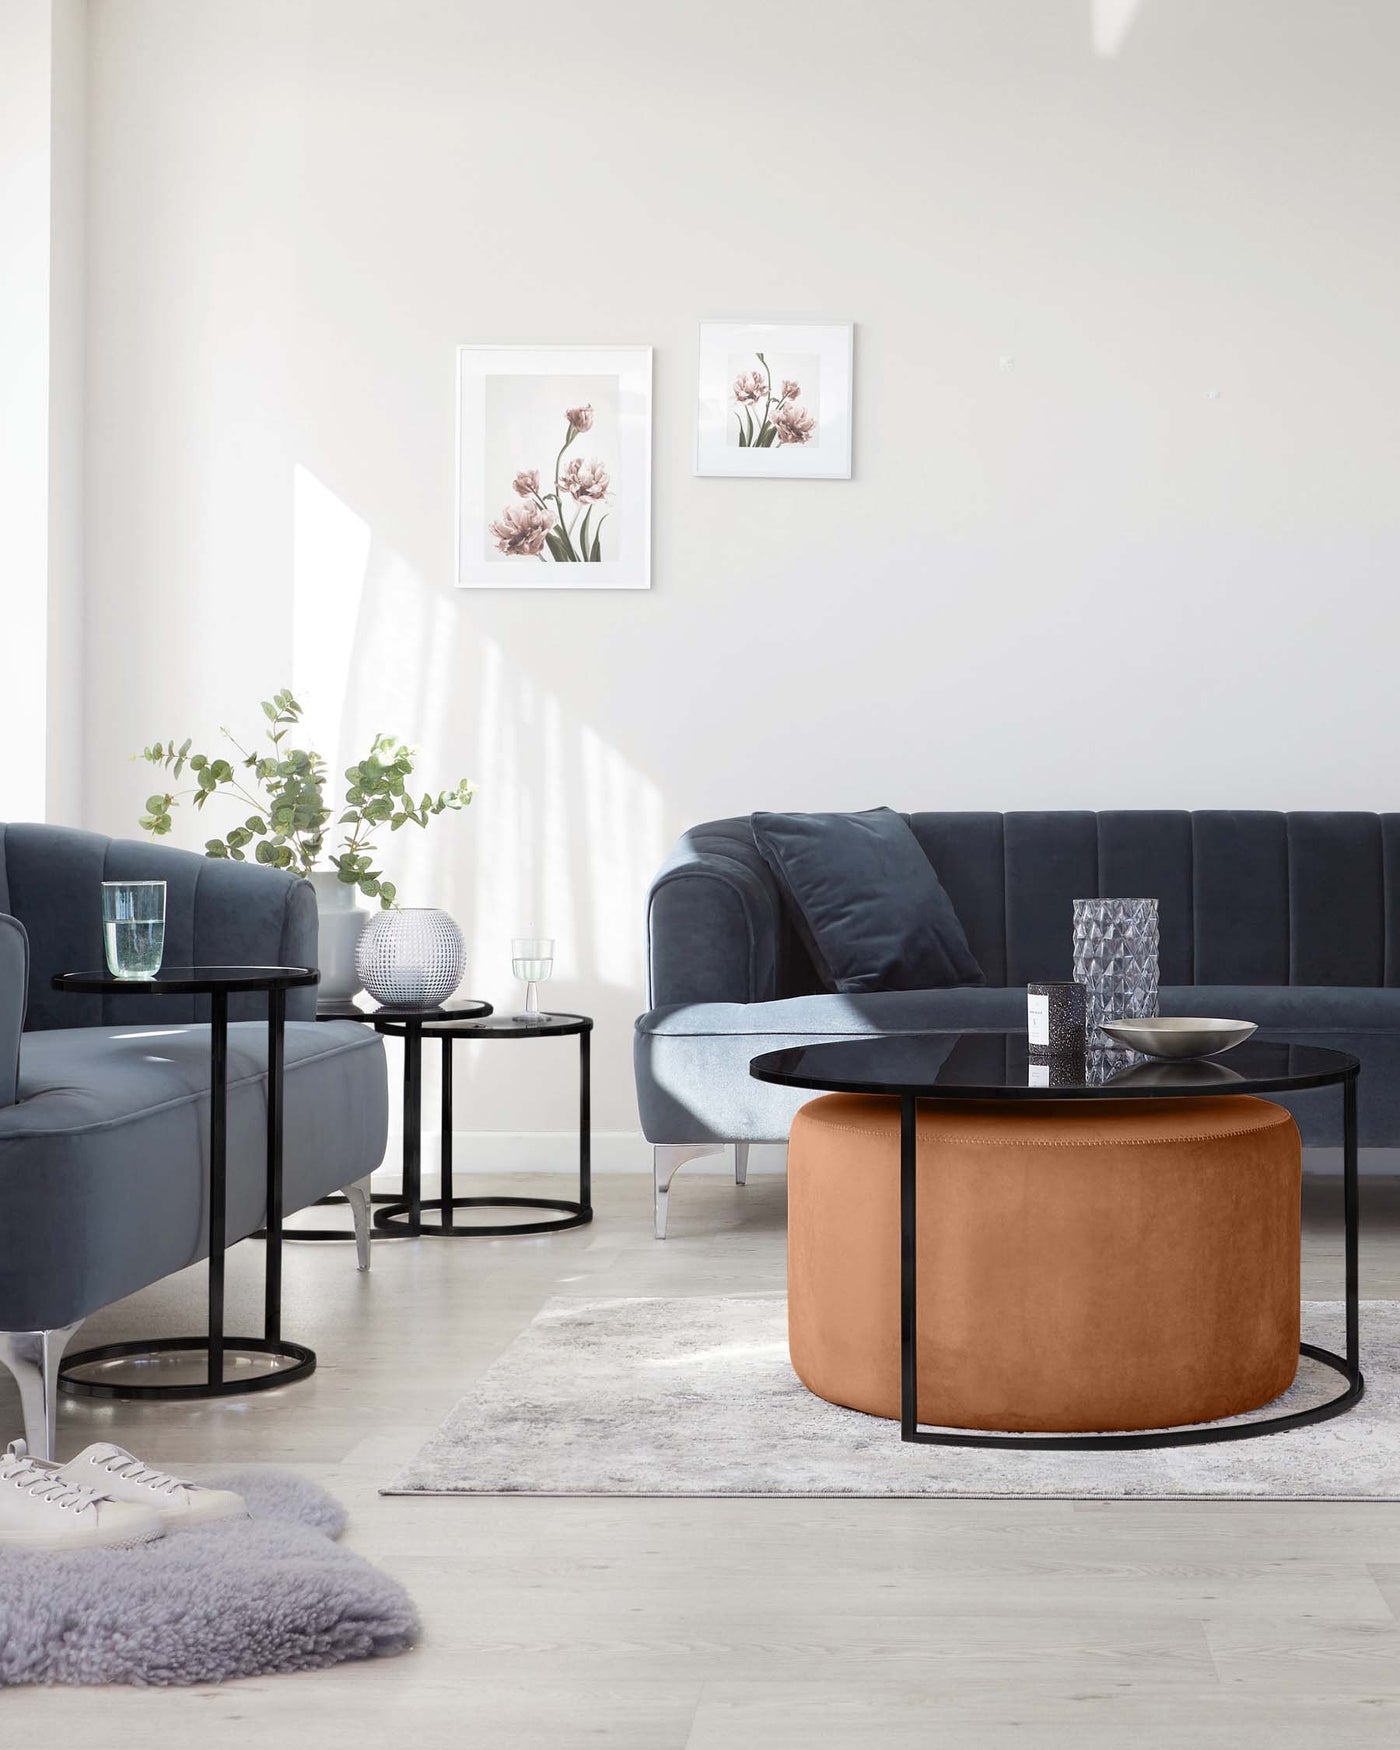 Modern living room showcasing a dark blue upholstered sofa with button detailing, flanked by two round black metal side tables with glass tops. In the centre stands a two-tiered round coffee table; the upper level is black with a glass surface, while the lower is a saddle tan leather pouf. A light grey area rug anchors the set against a simple backdrop.